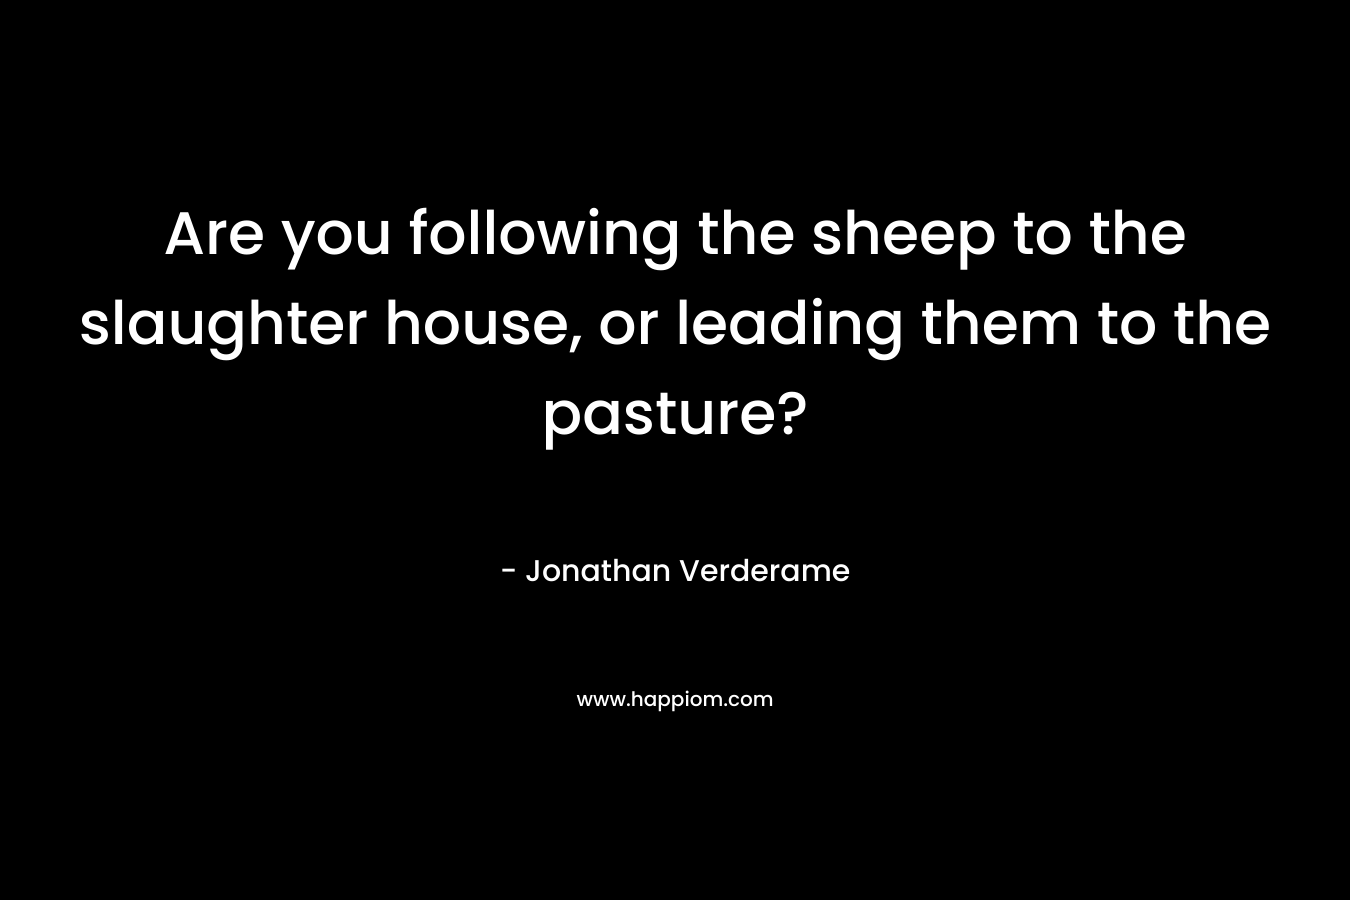 Are you following the sheep to the slaughter house, or leading them to the pasture?